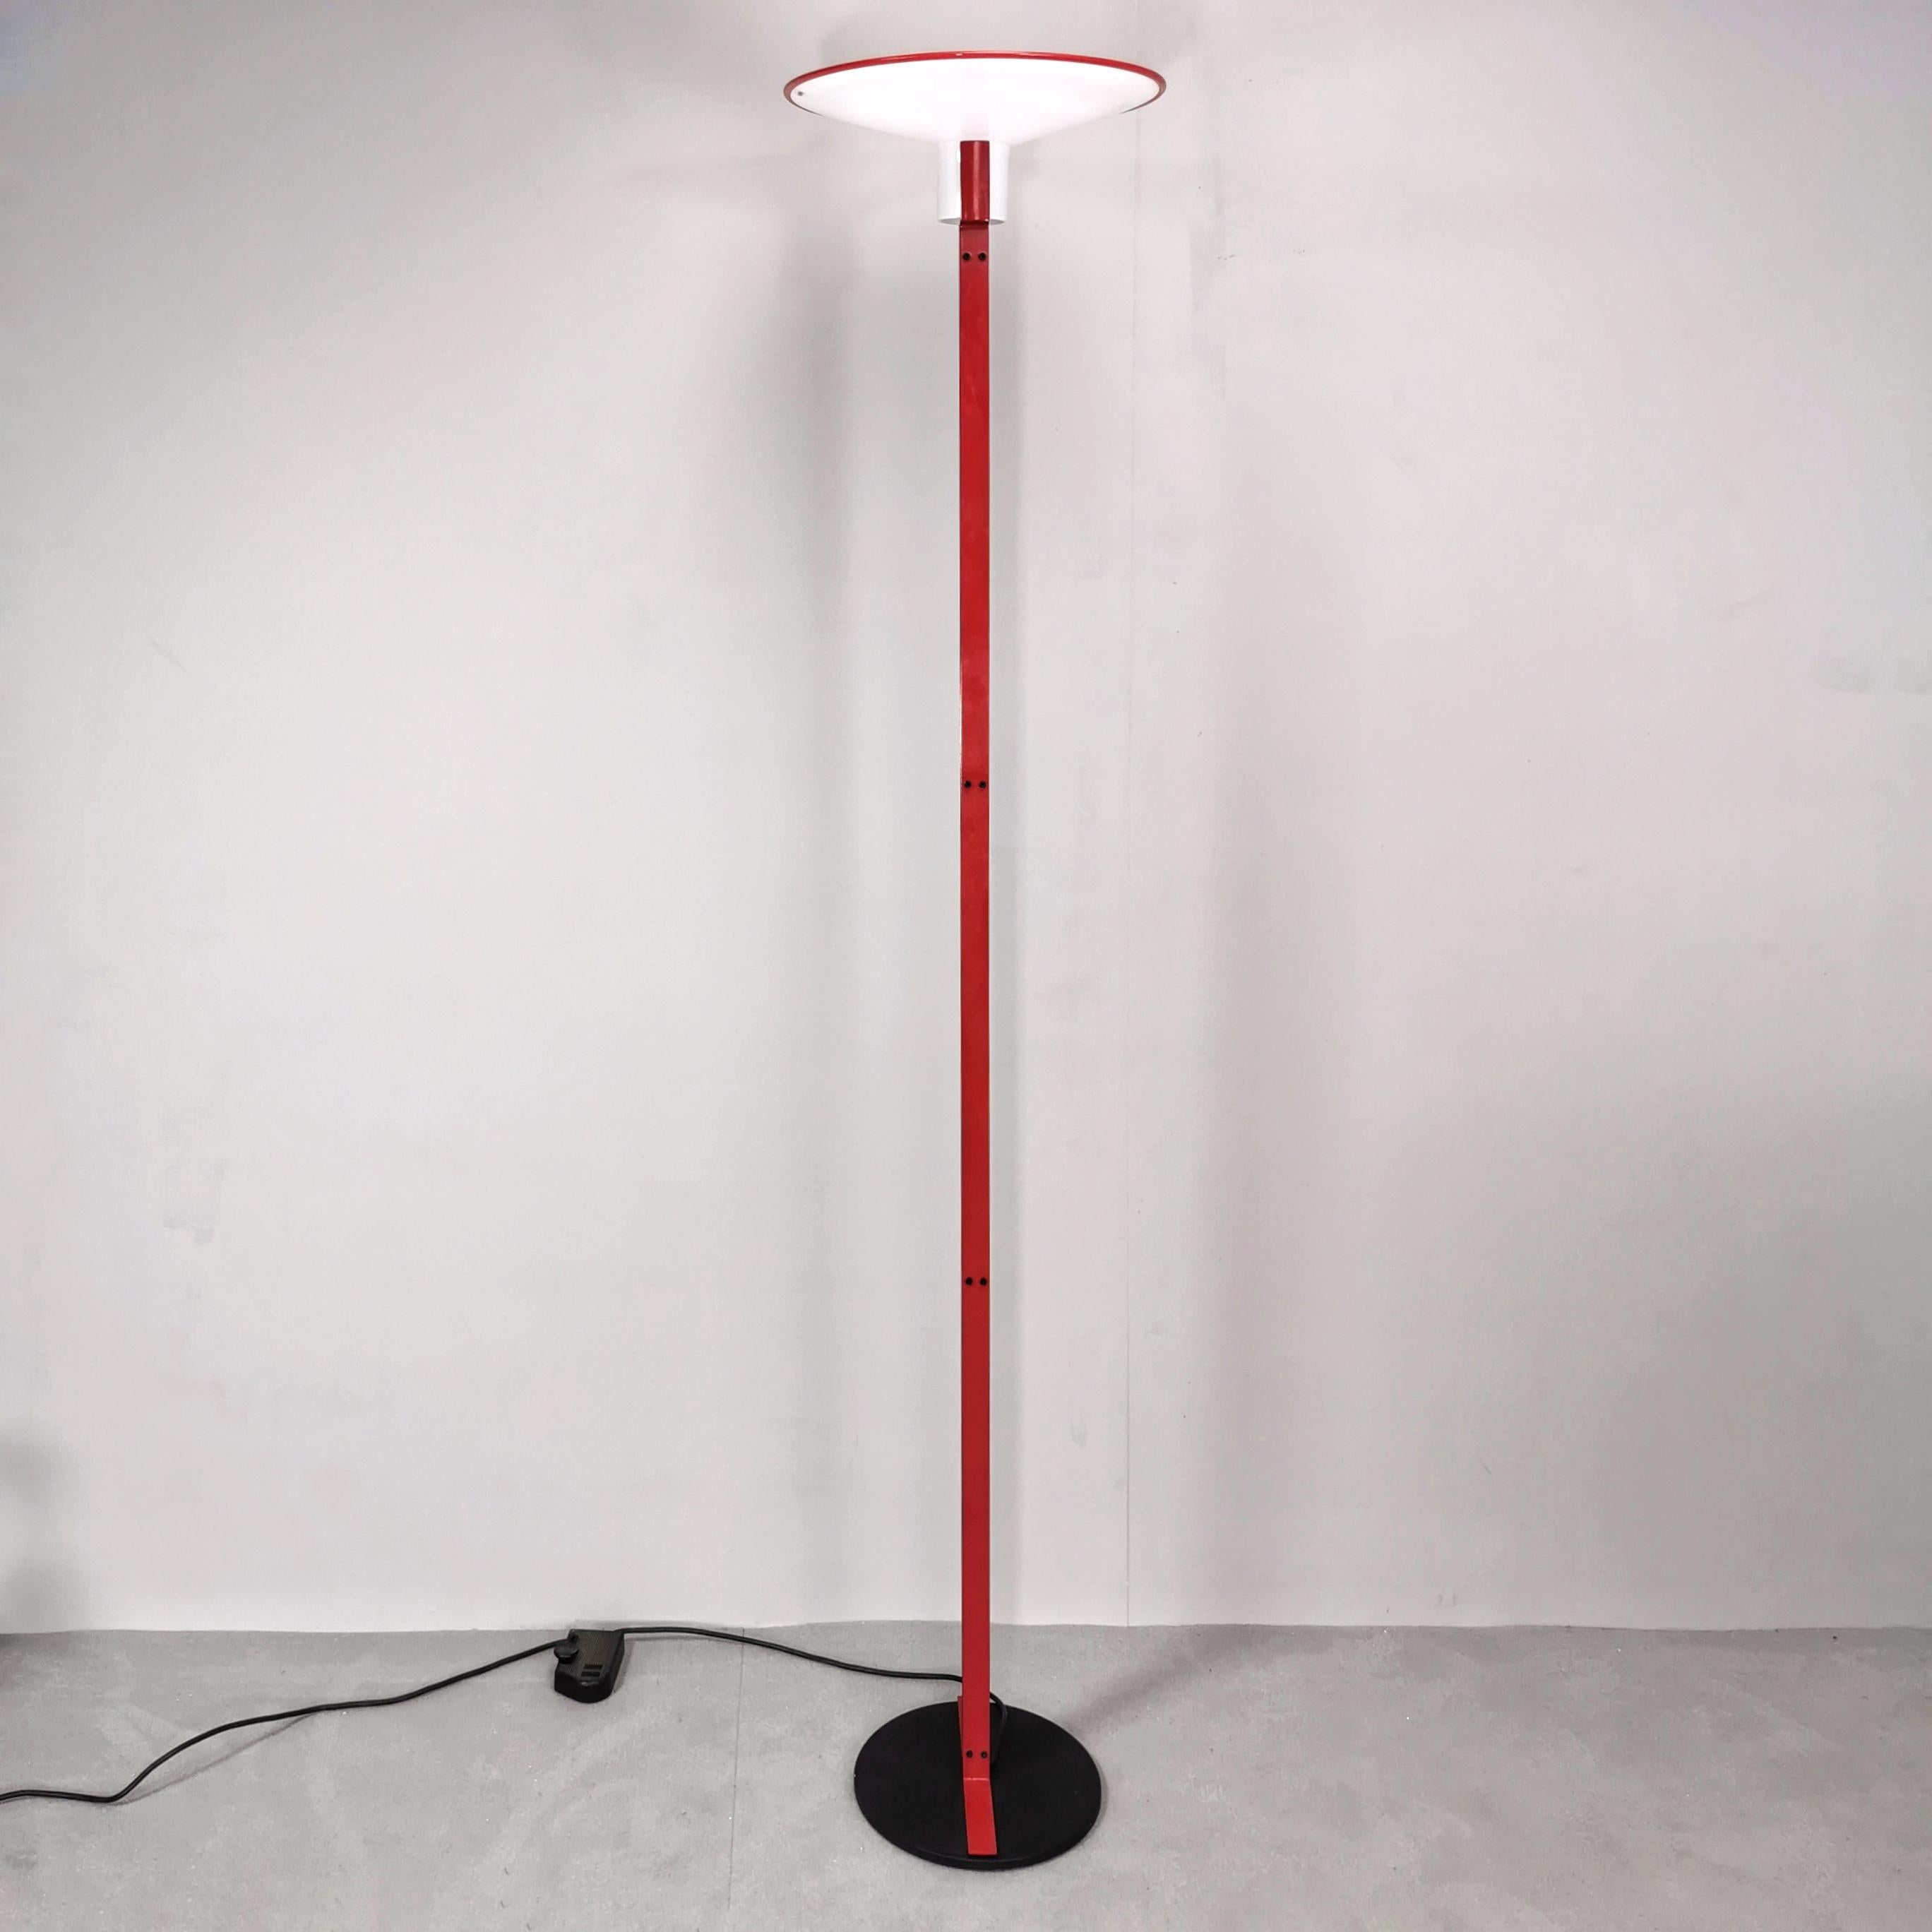 Venini art (Veart) lamp designed and produced in the early 1980s. This elegant and very rare floor lamp produced in a few pieces by Italian manufacturer VeArt shows adorable details. From a round base rise upward two flat stems of a beautiful red